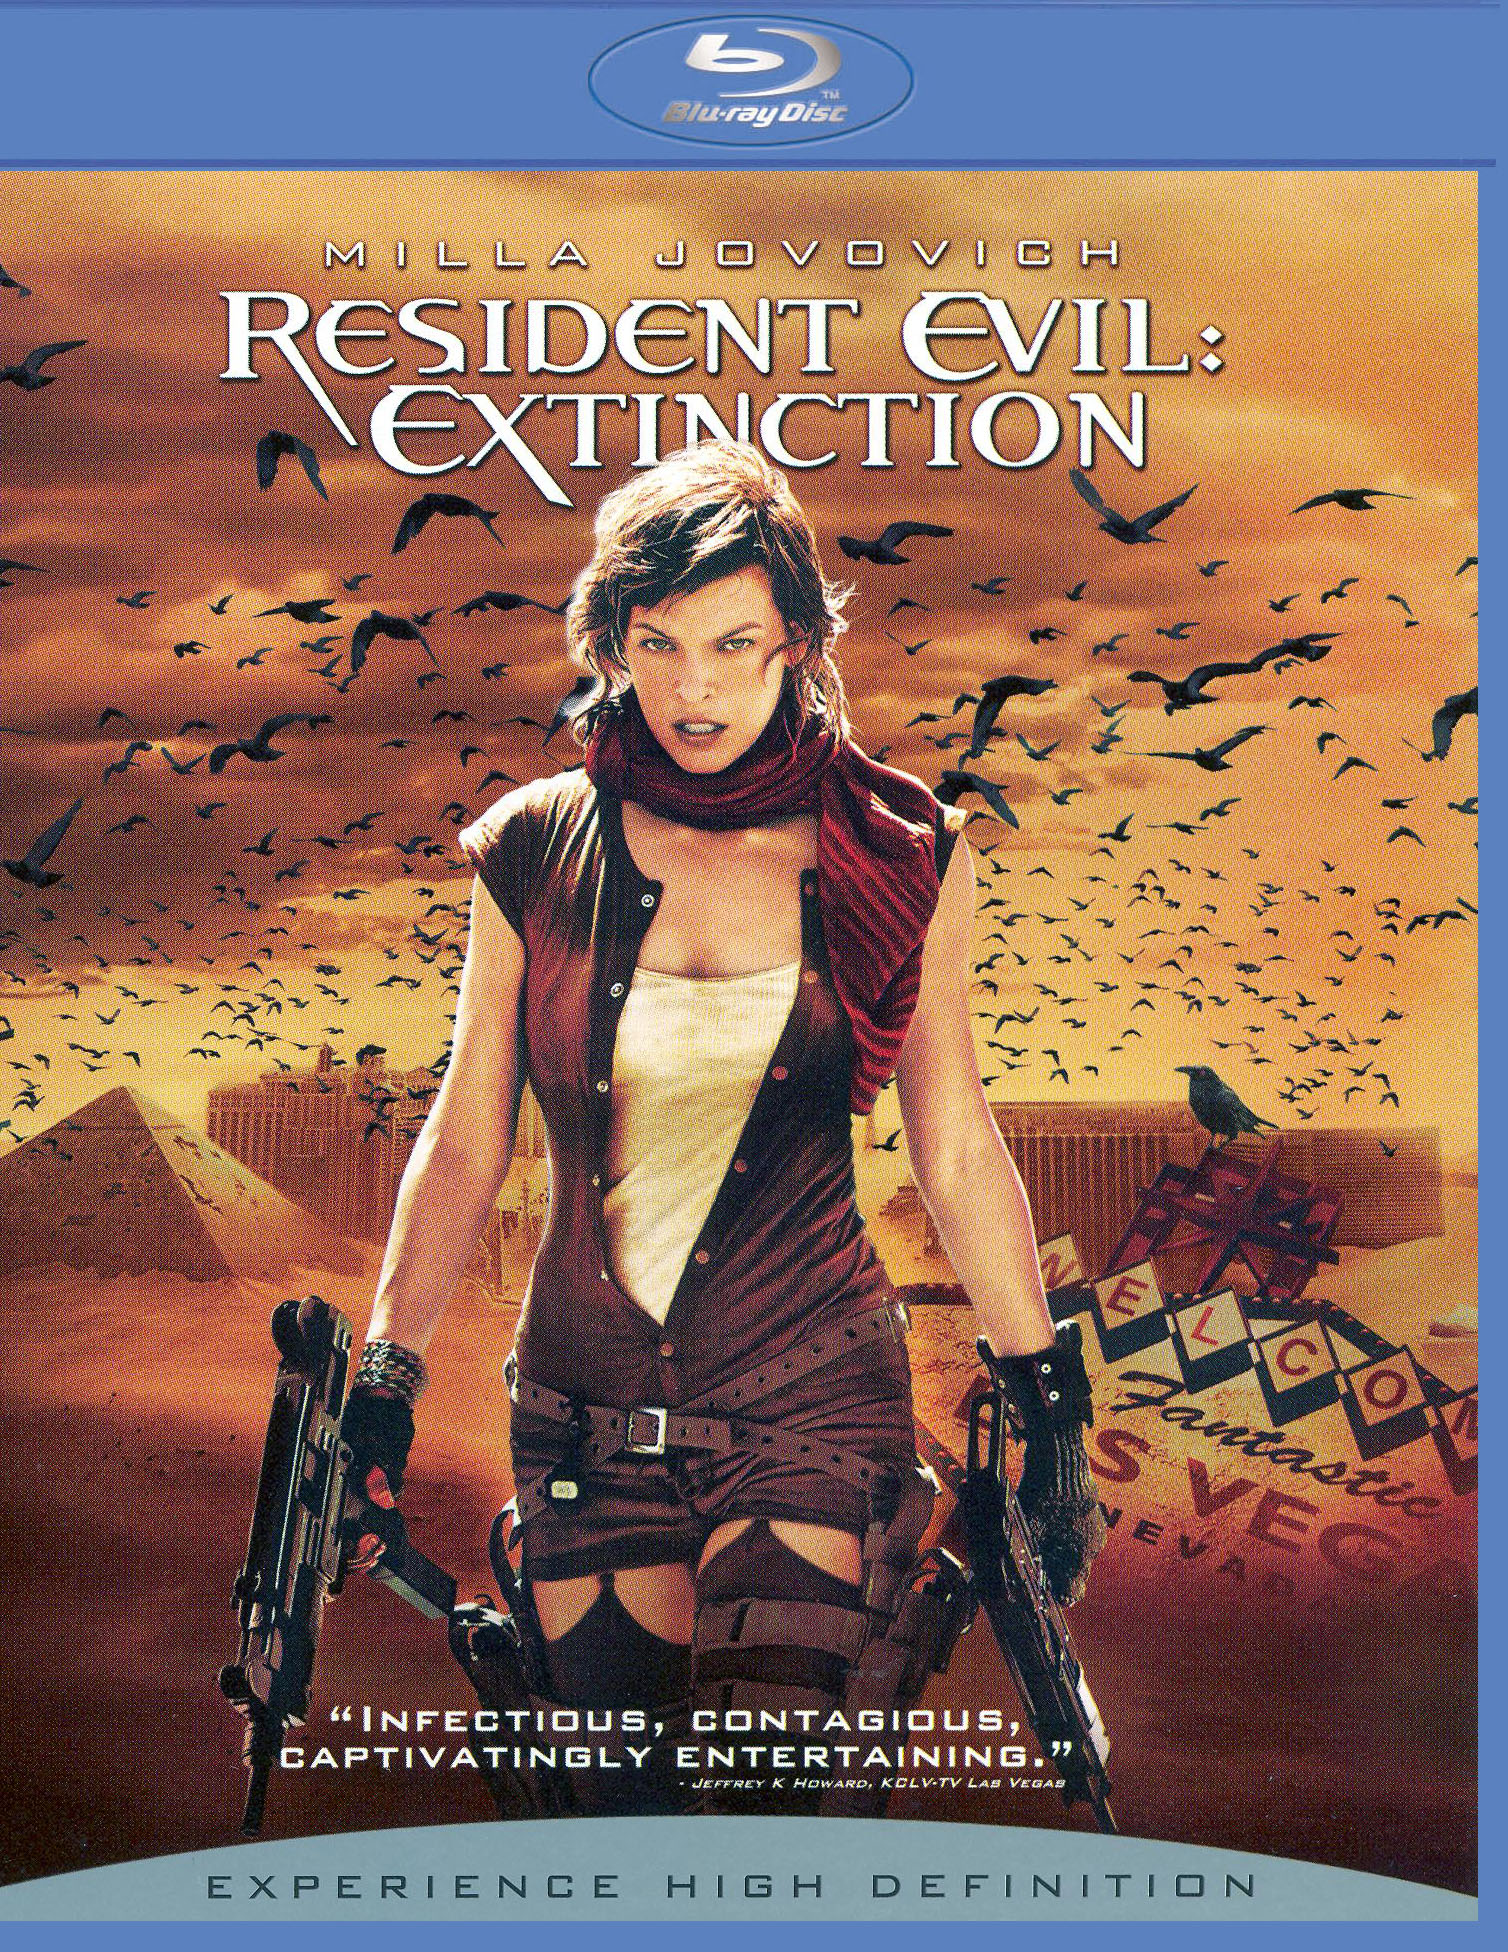 The 4-Movie Resident Evil Collection (Resident Evil/Resident  Evil:Apocalypse/Resident Evil:Extinction/Resident Evil:Afterlife)